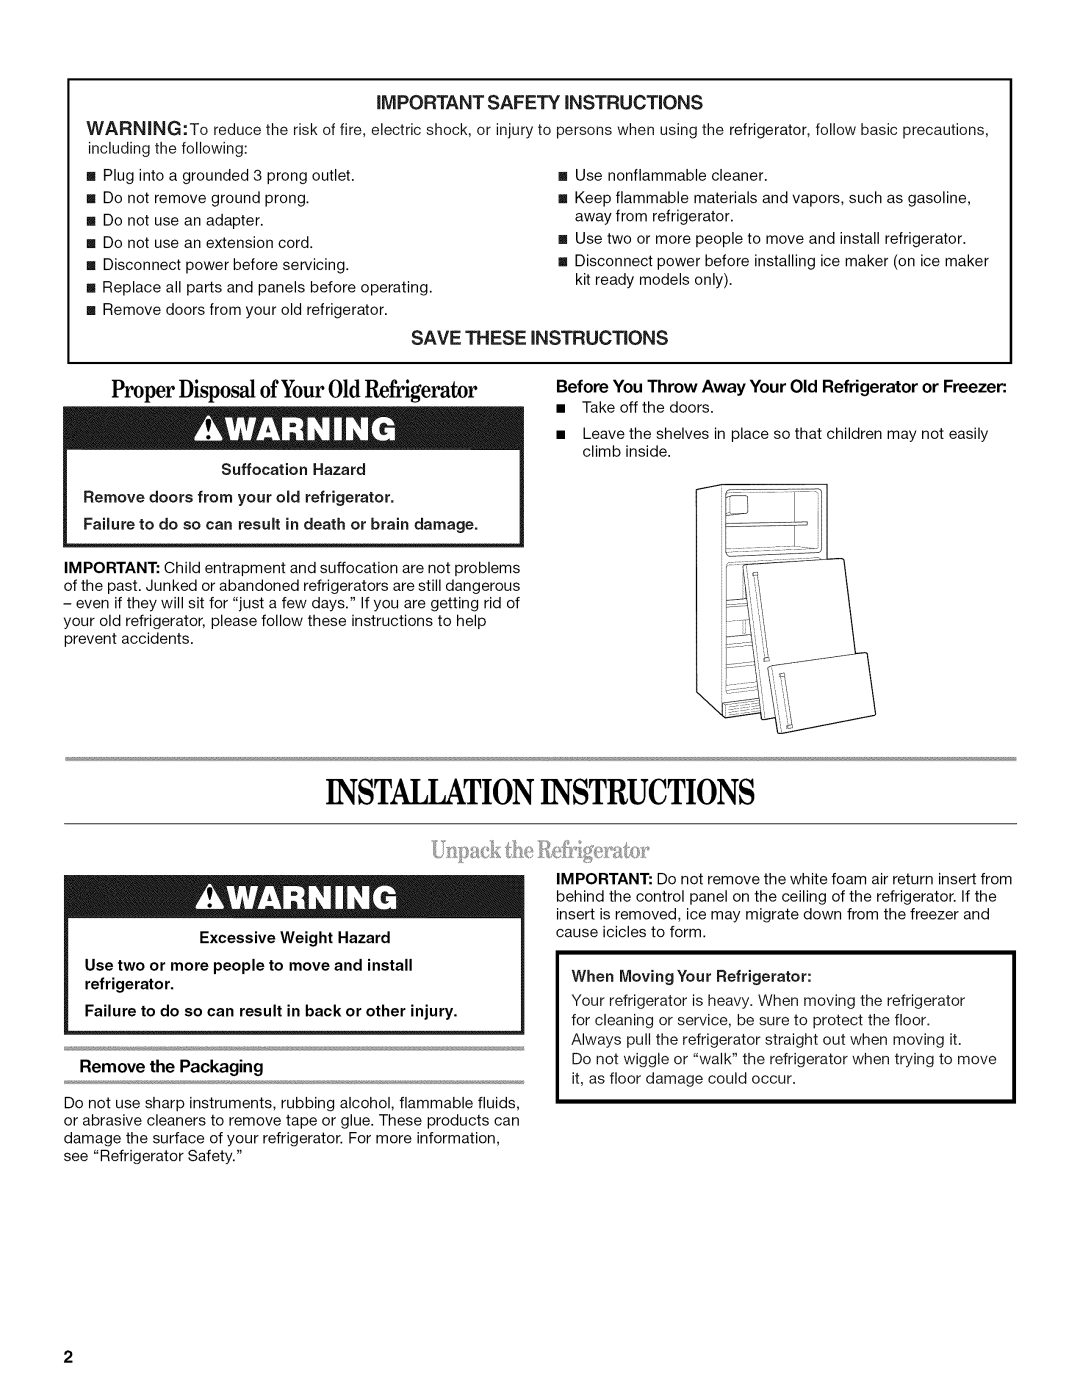 Whirlpool W10131412A Installationinstructions, Proper Disposal of Your Old Refrigerator, Safety, iNSTRUCTiONS 